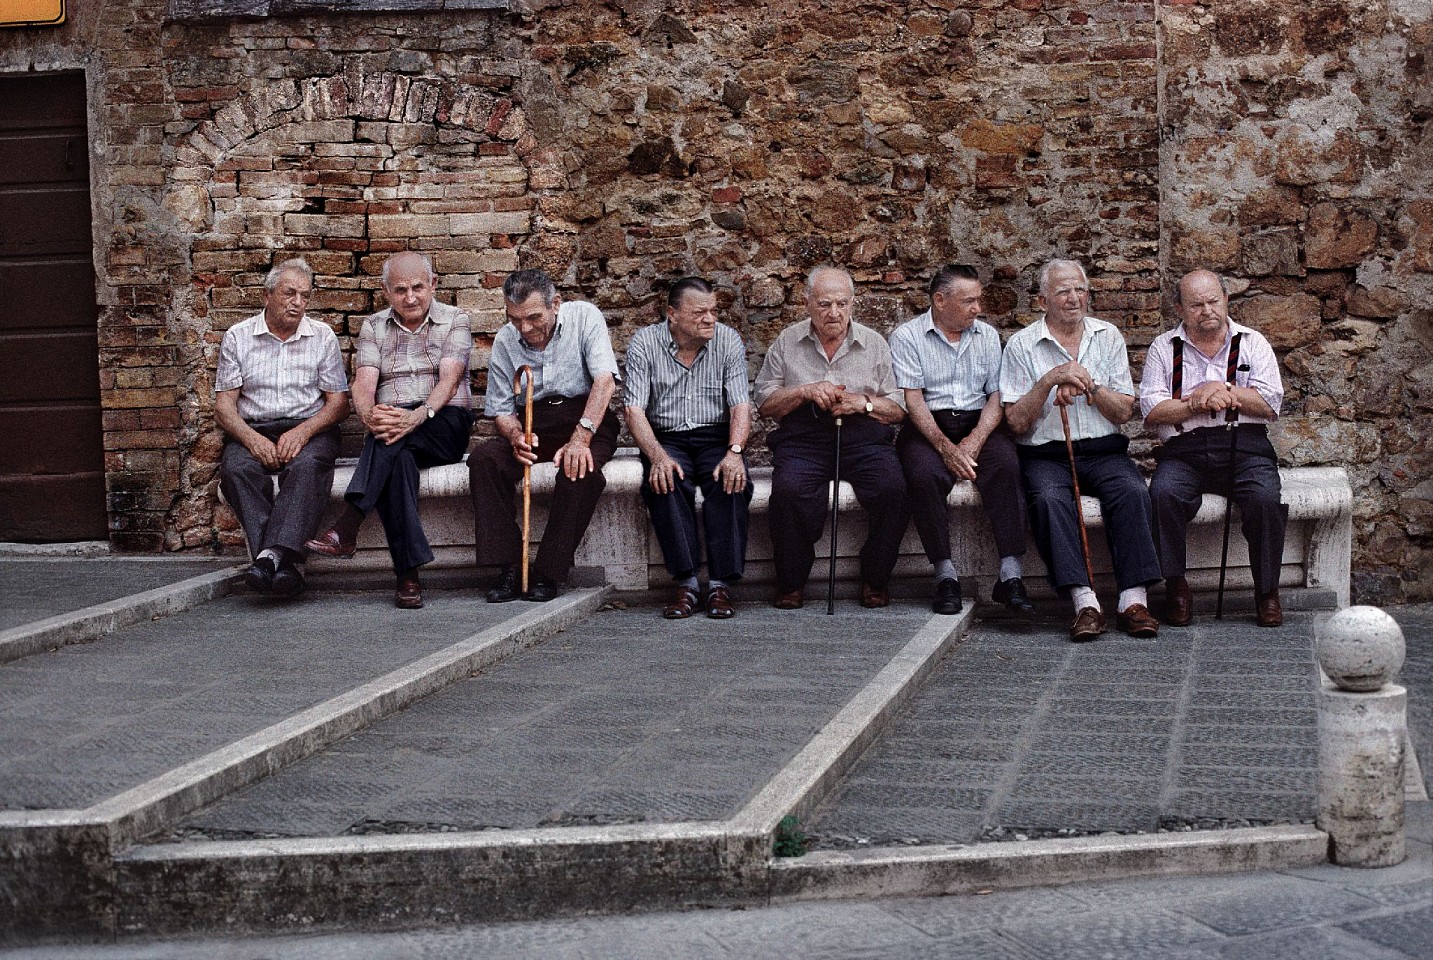 Steve McCurry, Elderly Men on Bench, 1998
FujiFlex Crystal Archive Print
Price/Size on request